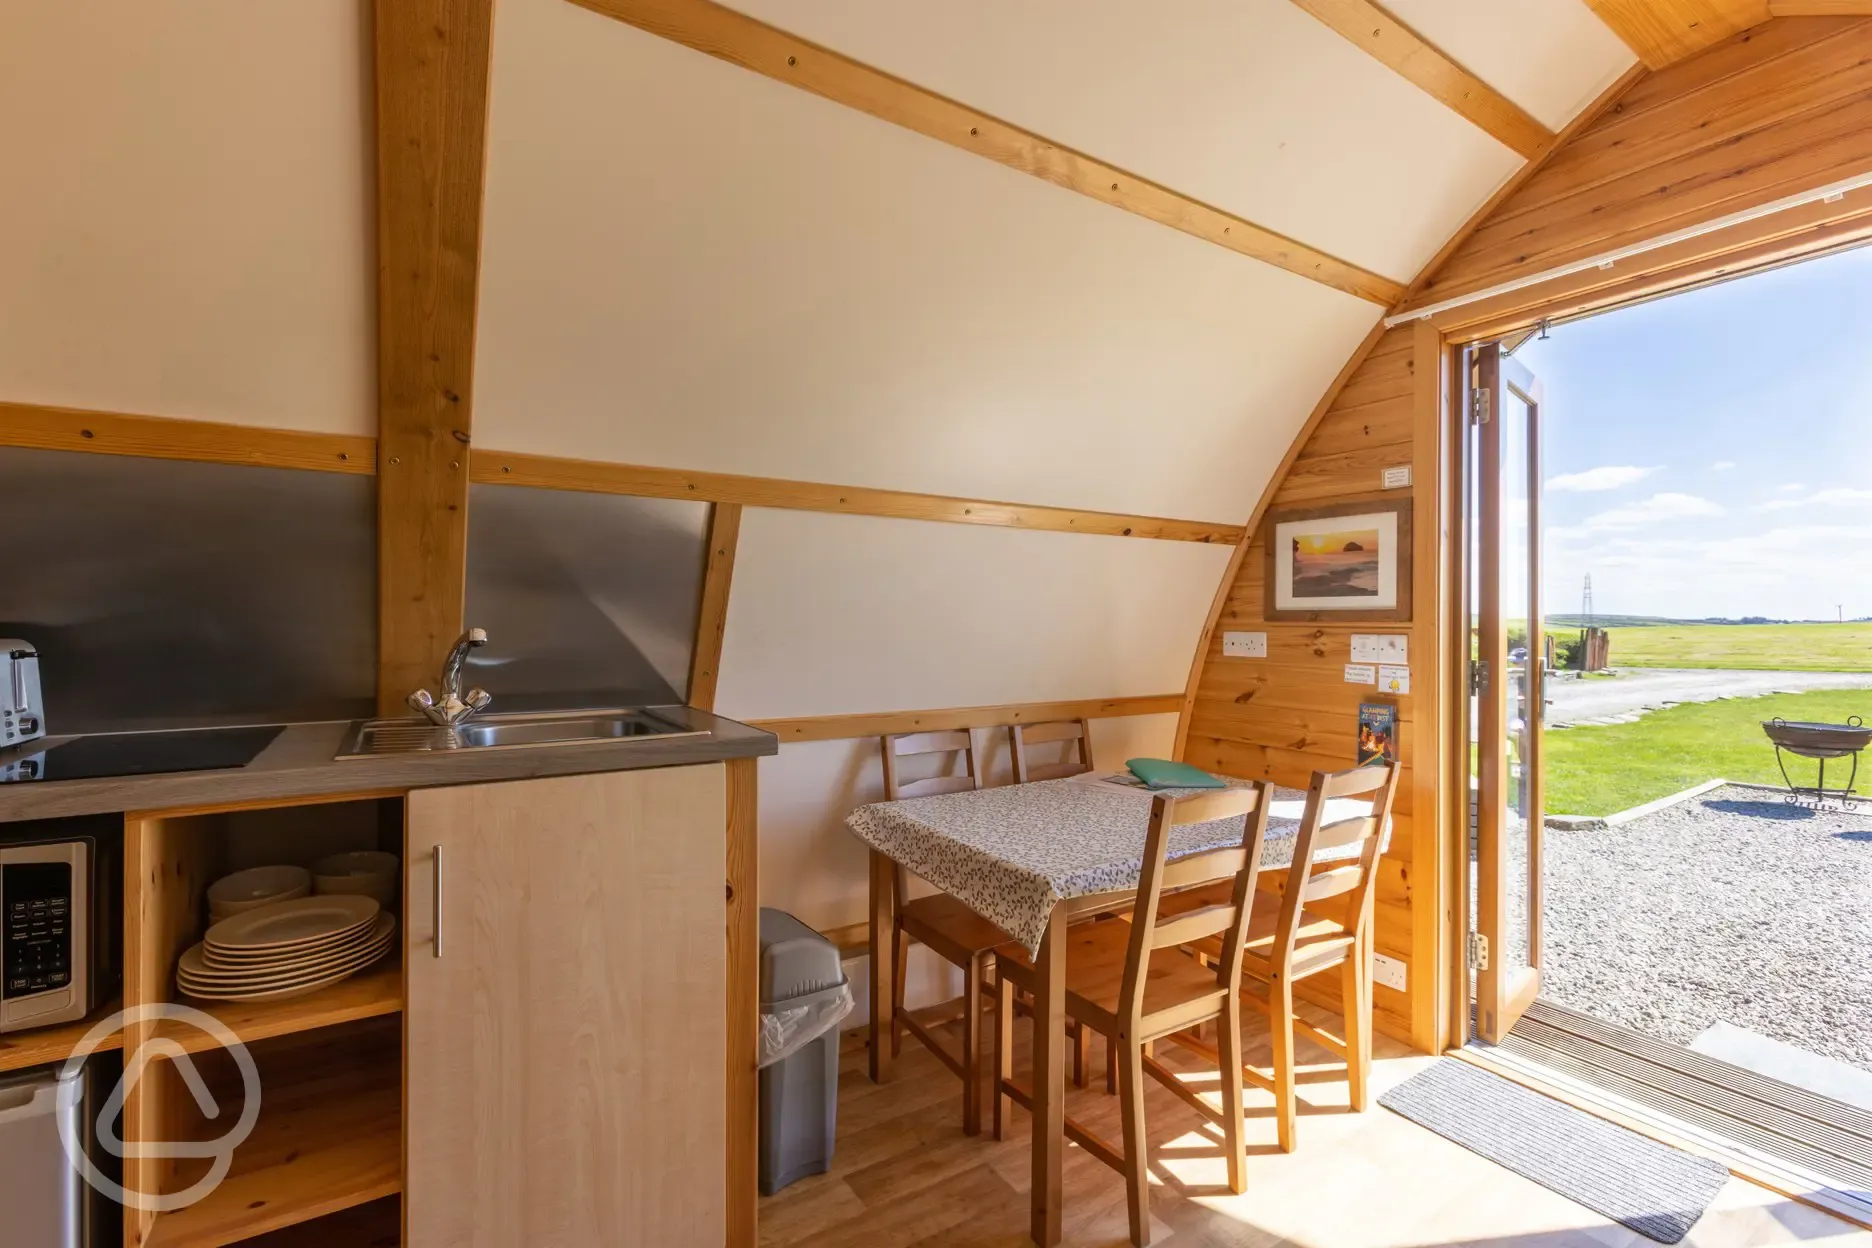 Wigwam pod kitchenette and dining area